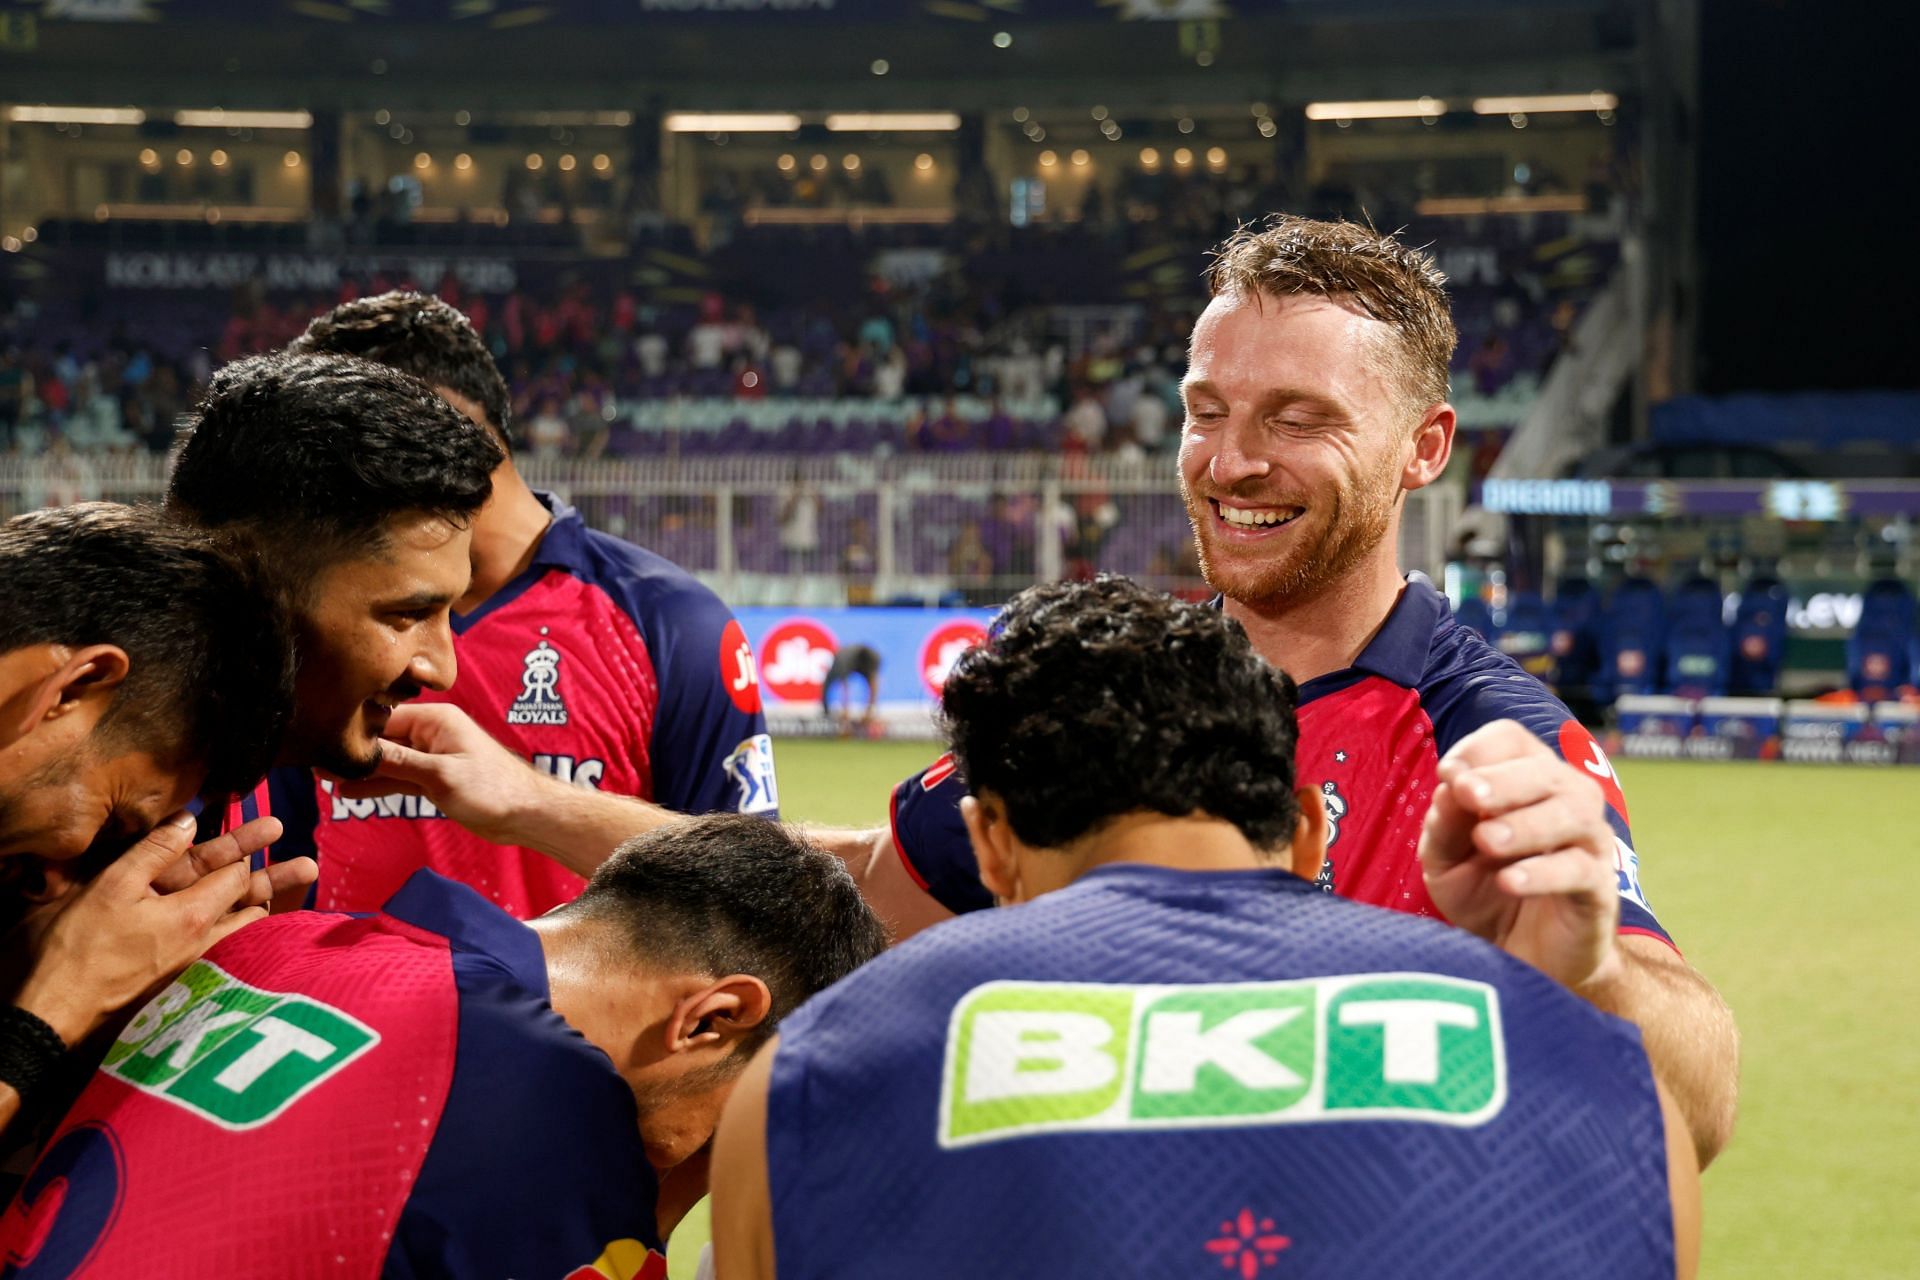 Teammates bow down to Jos Buttler after his heroics. (Credits: Twitter)